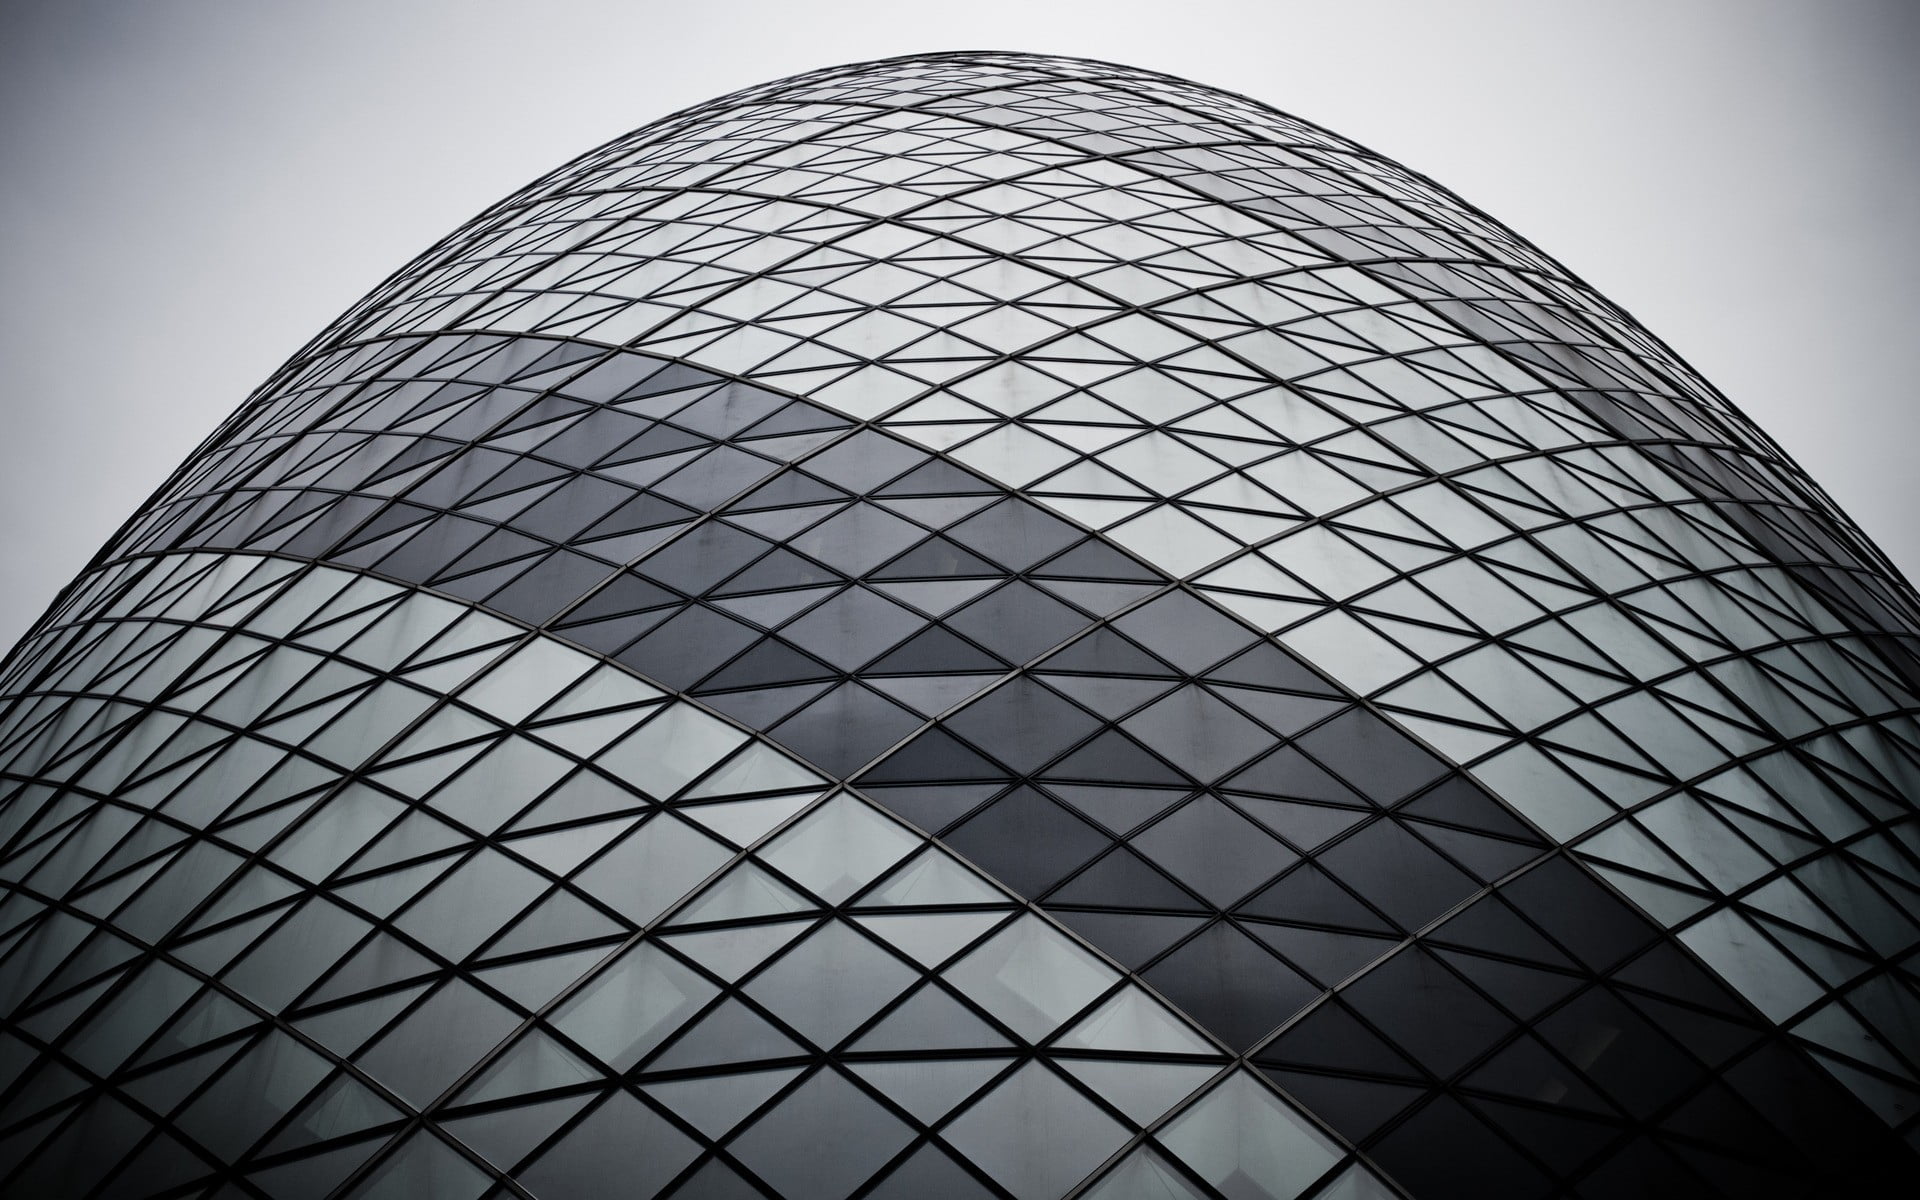 glass dome structure, cityscape, 30 St Mary Axe, London, England